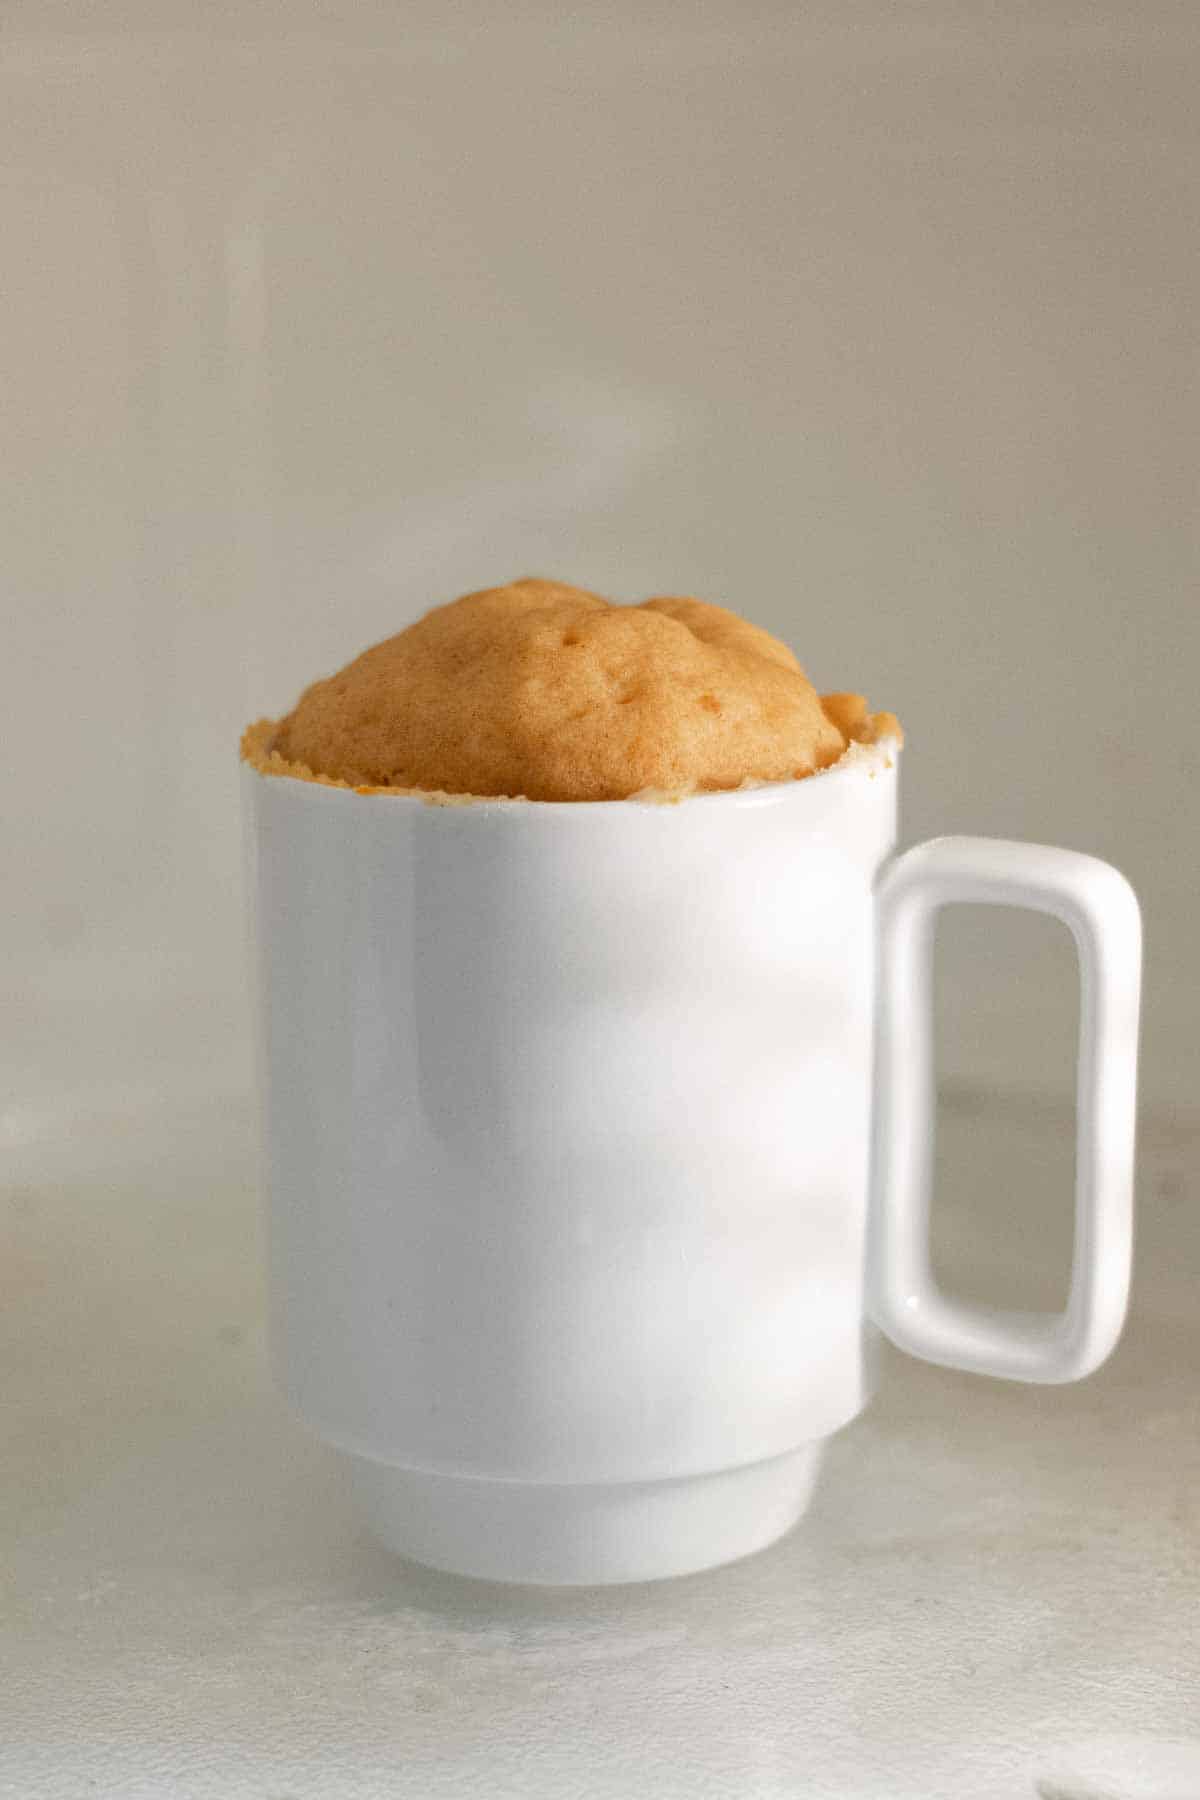 Cooked cake risen over edge of mug just after microwaving.